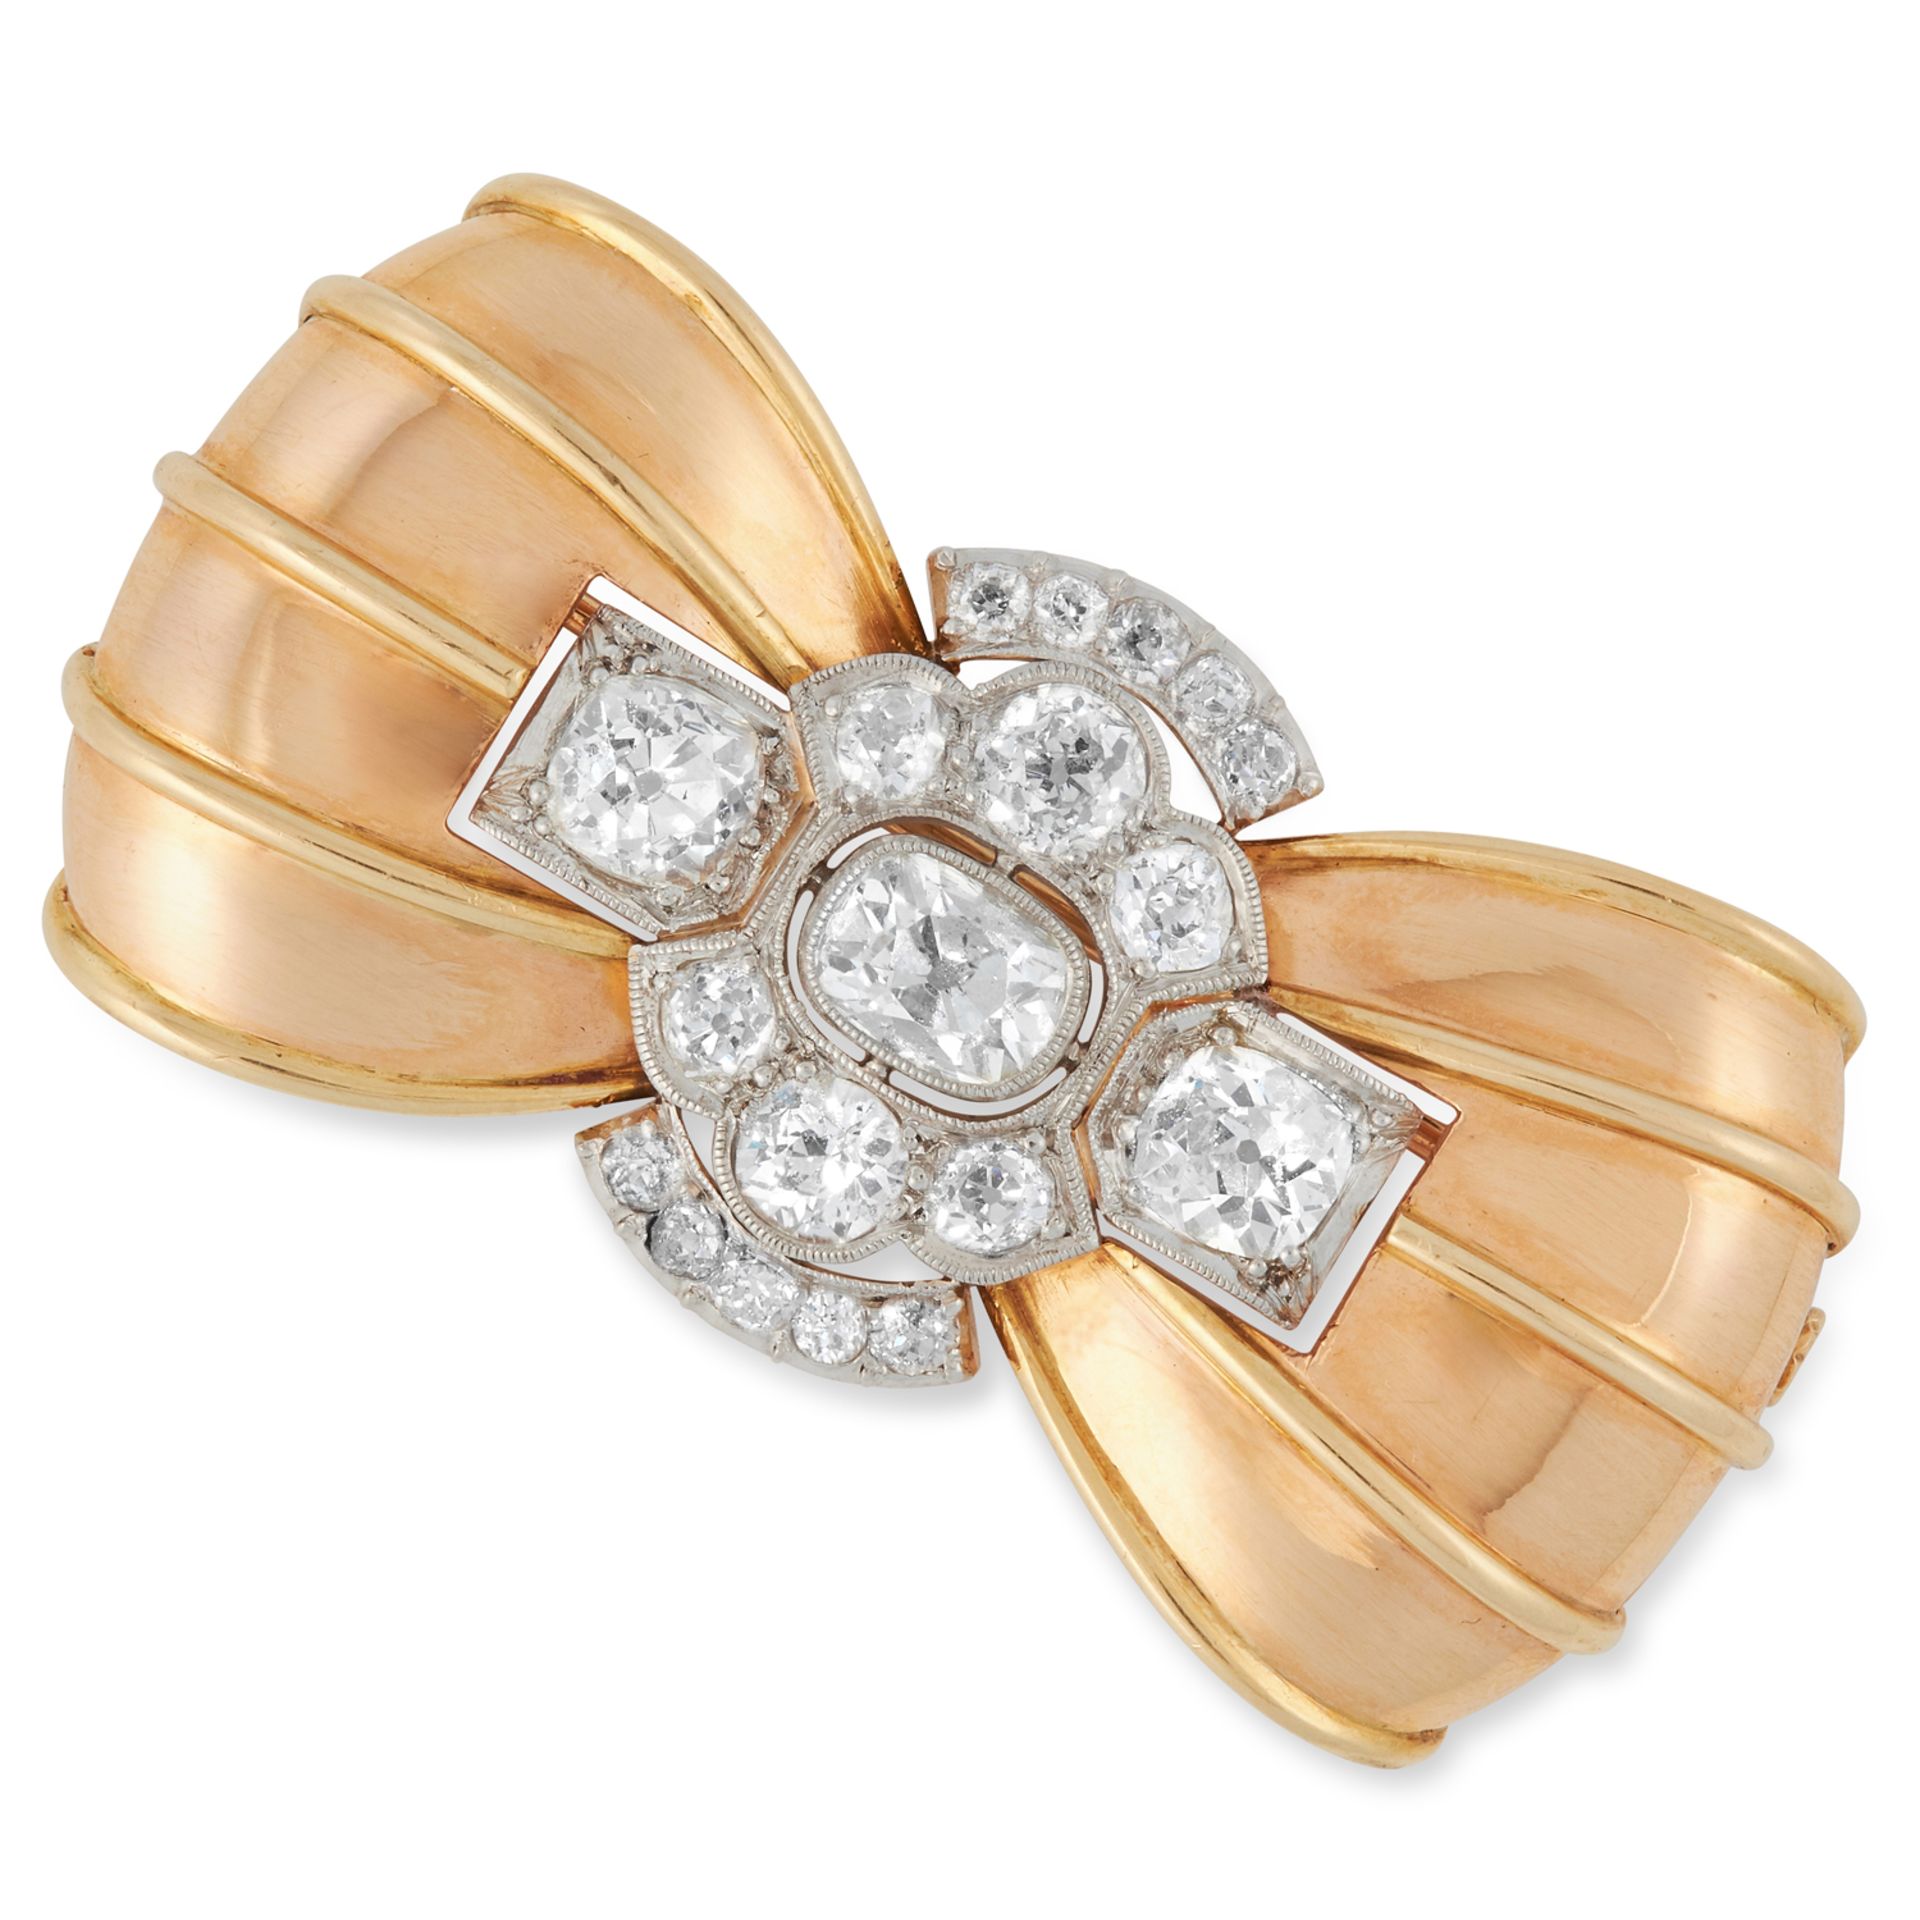 A RETRO DIAMOND BOW BROOCH, 1940s set with a trio old cut diamonds of 1.80, 1.33 and 1.07 carats,